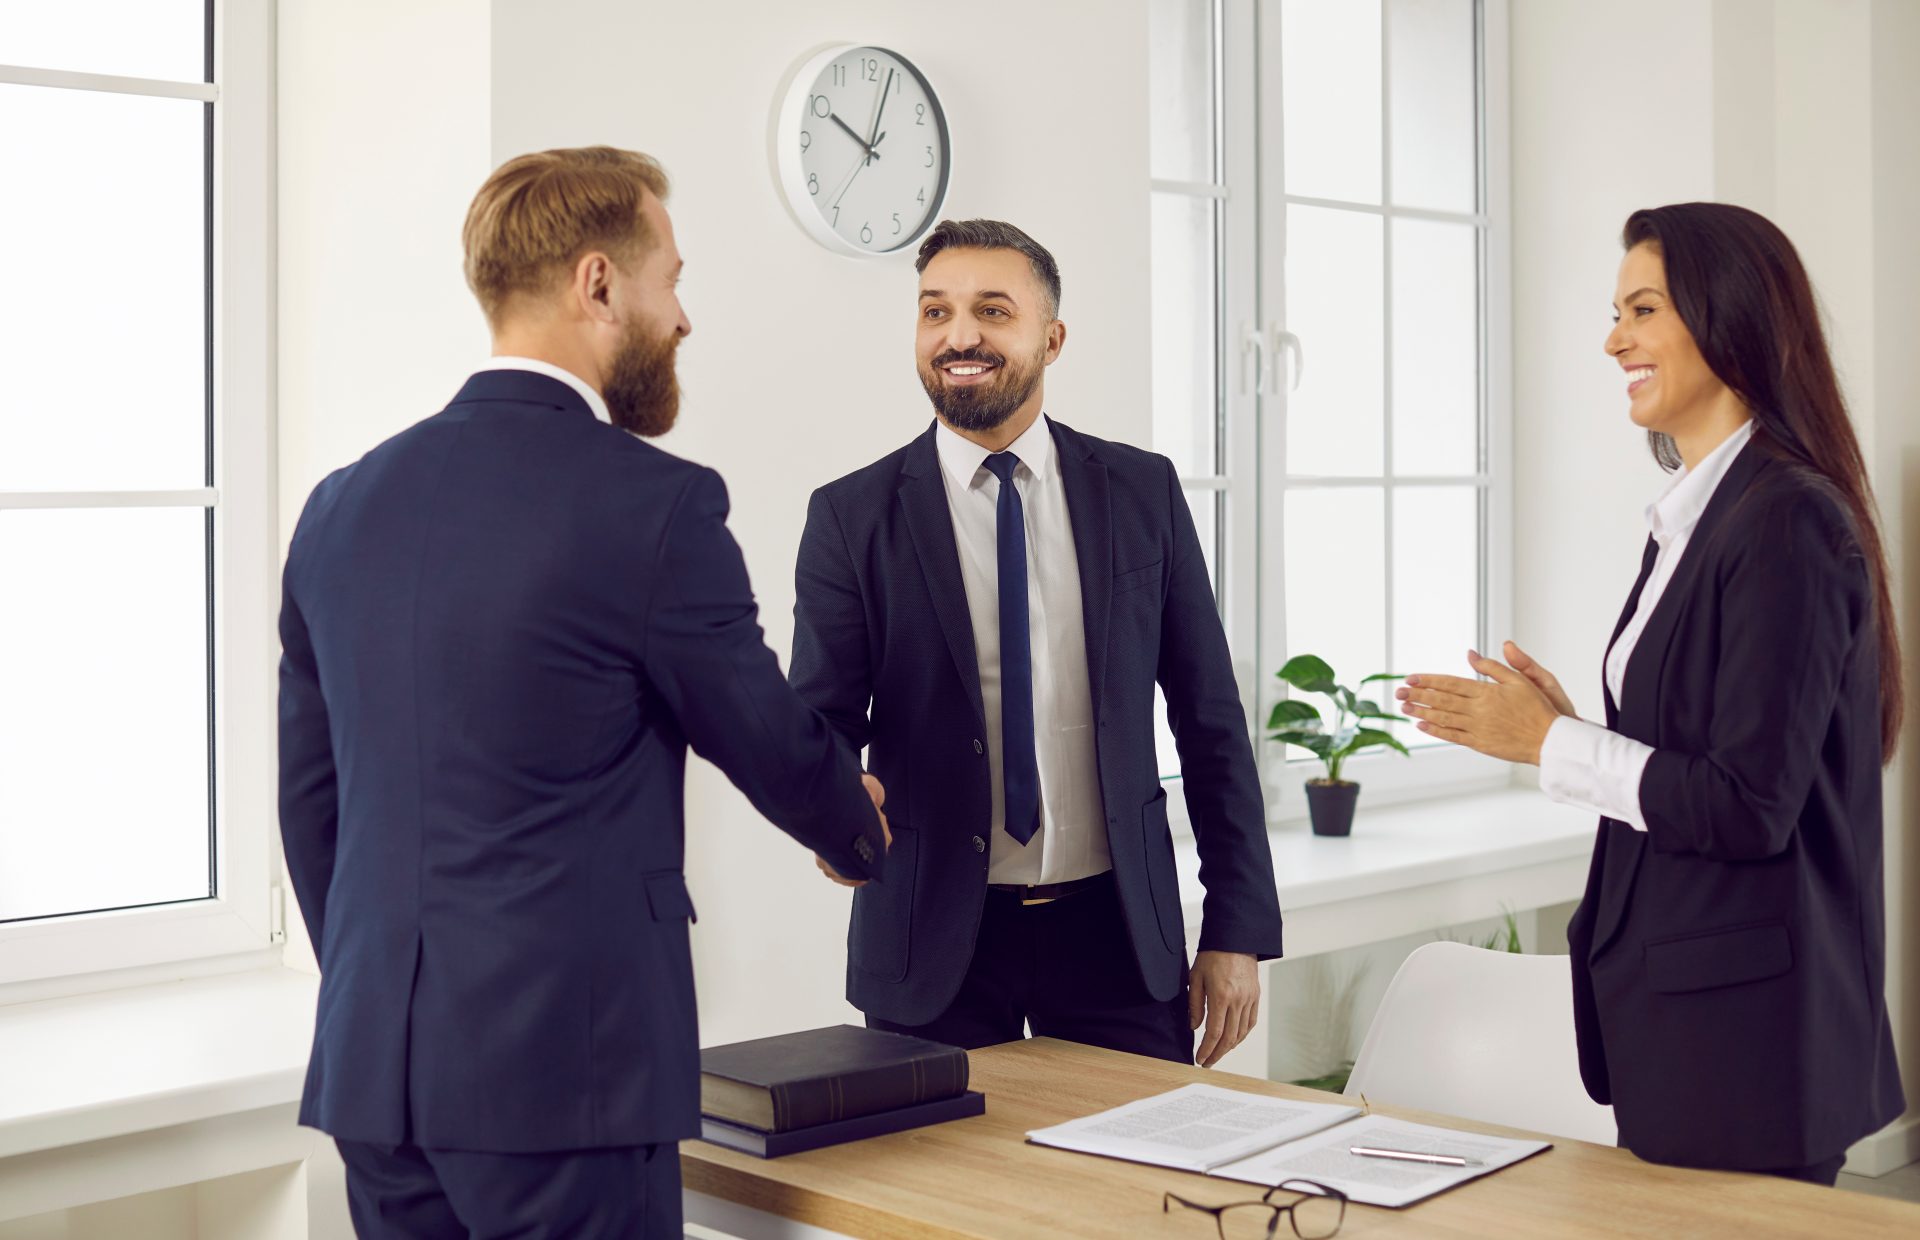 Happy client and lawyer exchanging a handshake in the office or courthouse. Businessman shaking hands with his attorney or business consultant, thanking him for his service and professional law advice